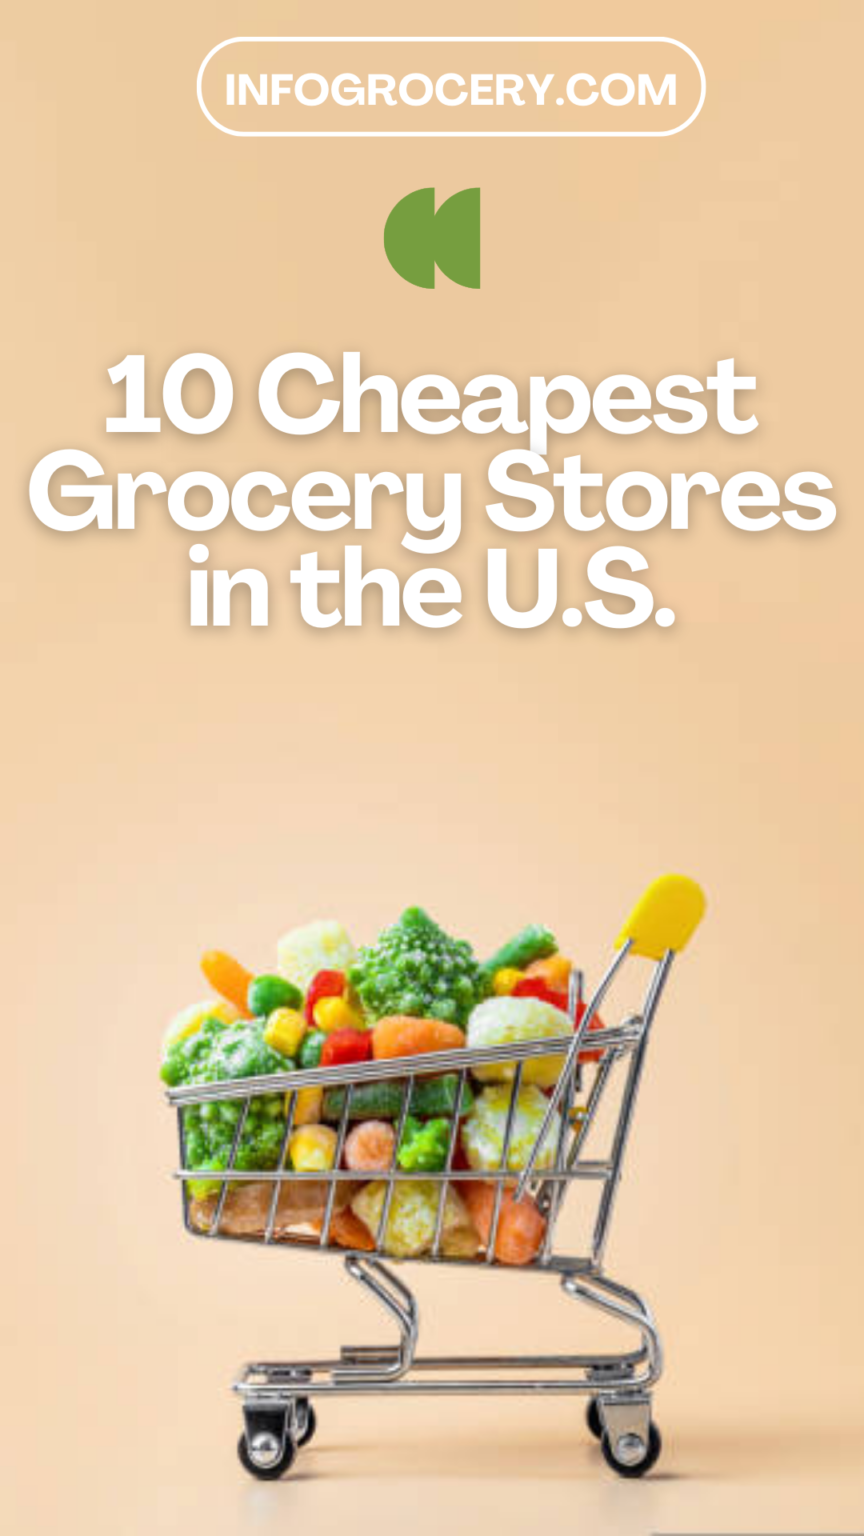 10 Cheapest Grocery Stores in the U.S. Infogrocery